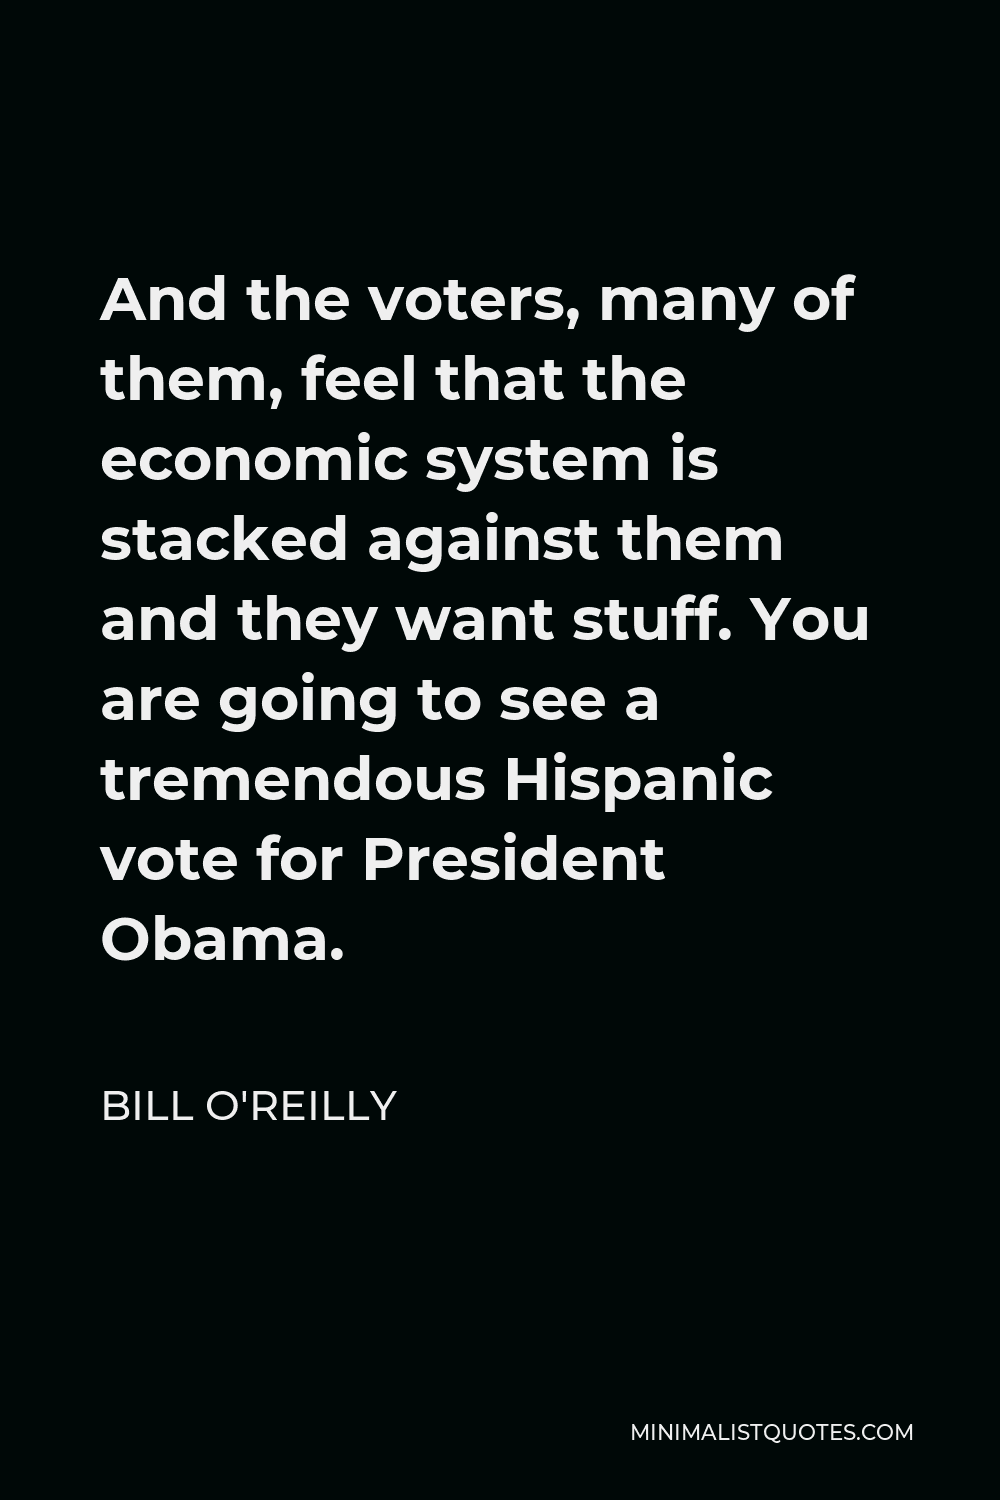 Bill O'Reilly Quote - And the voters, many of them, feel that the economic system is stacked against them and they want stuff. You are going to see a tremendous Hispanic vote for President Obama.